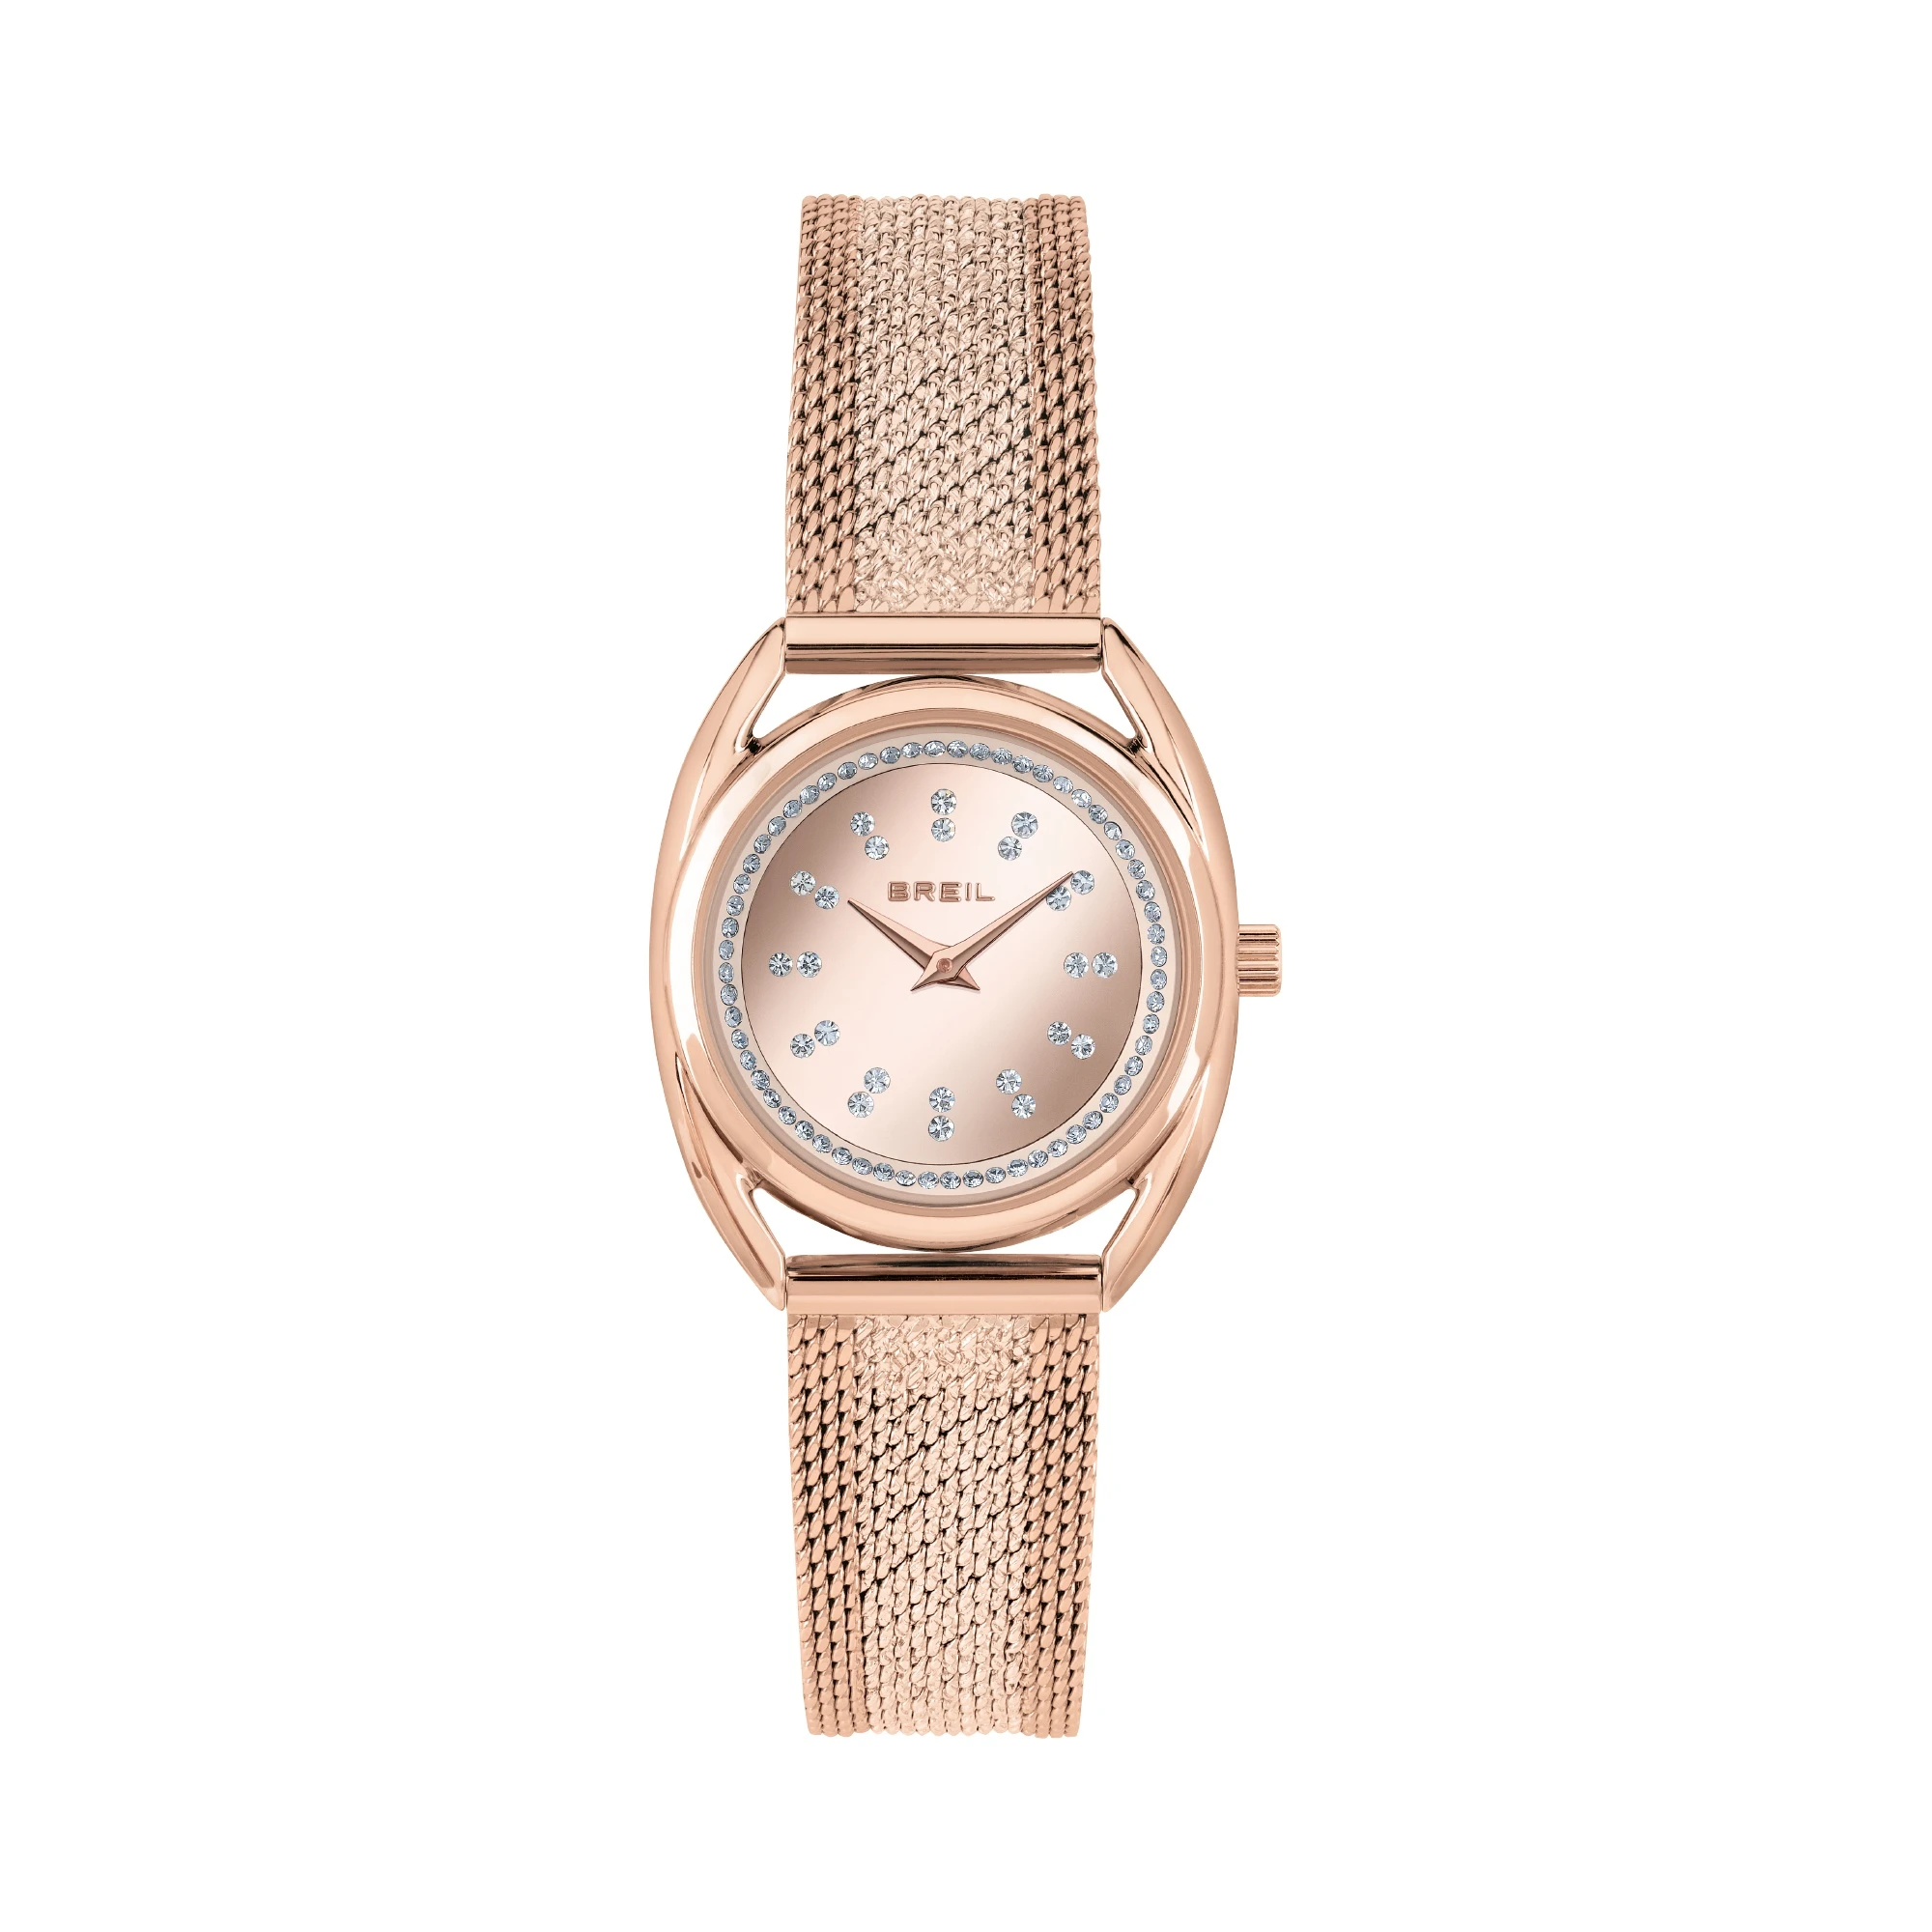 PETIT CHARME - TIME ONLY DAME 28 MM - 1 - TW1895 | Breil